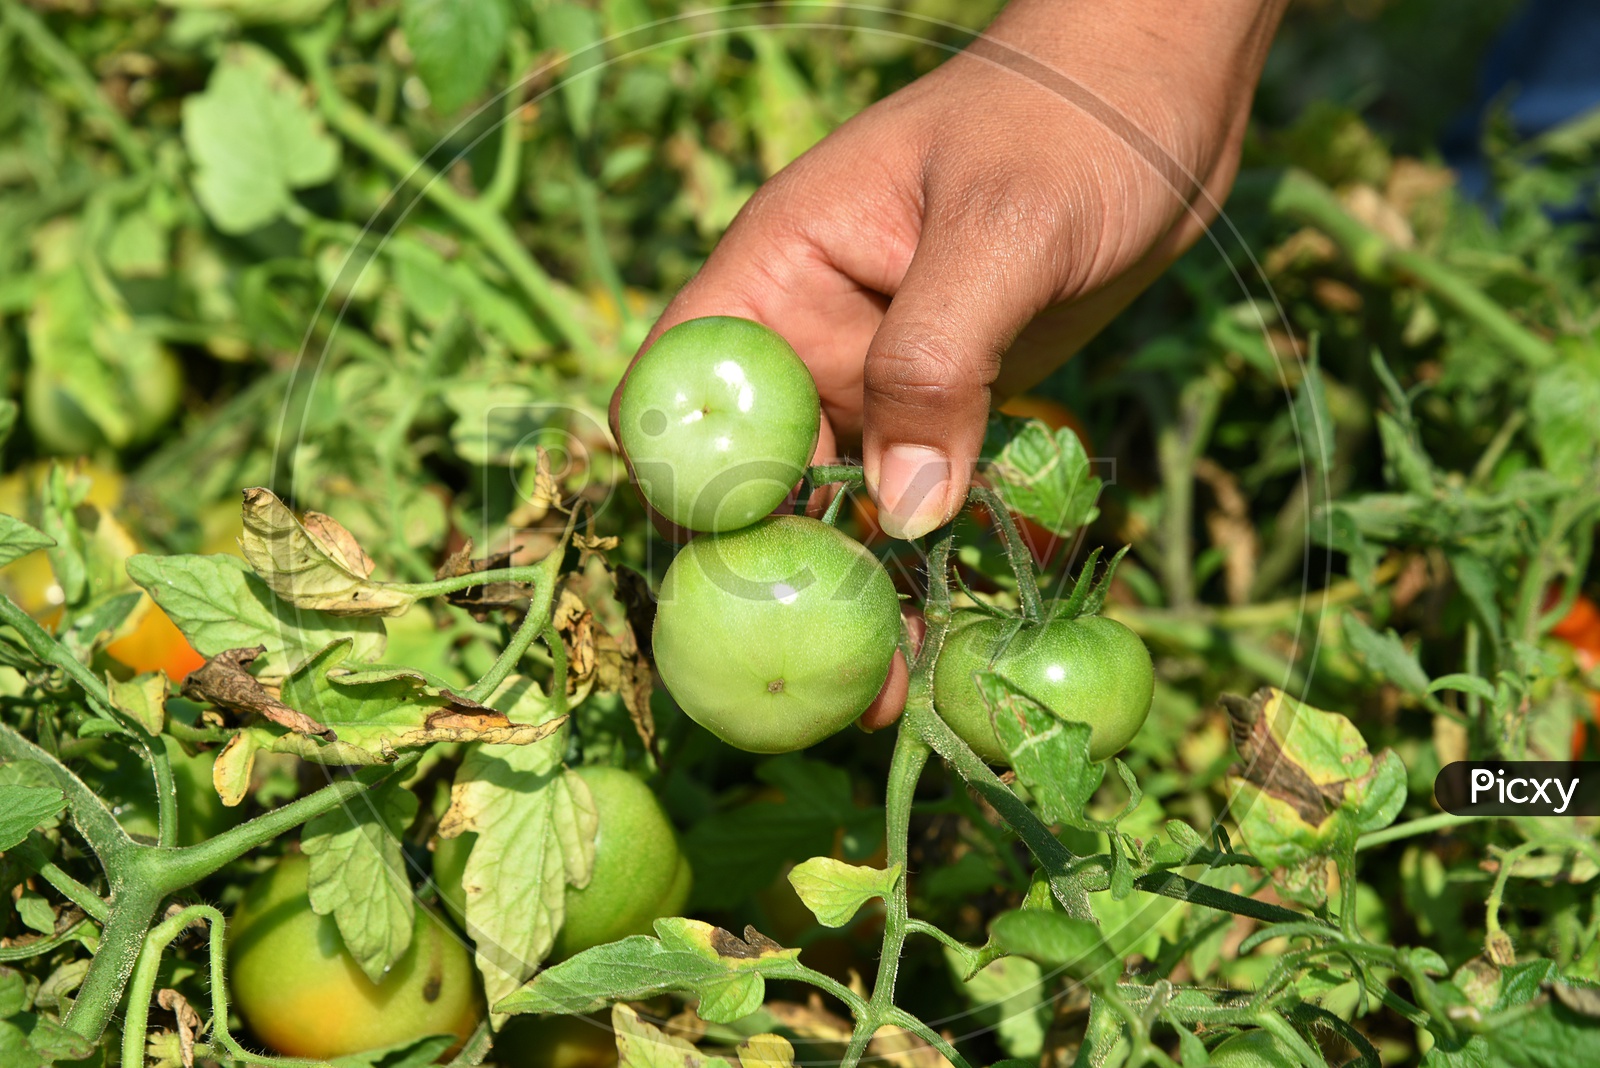 A Young Indian Woman Picking   Hands Closeup of  Organic Tomatoes From an Agricultural Farm